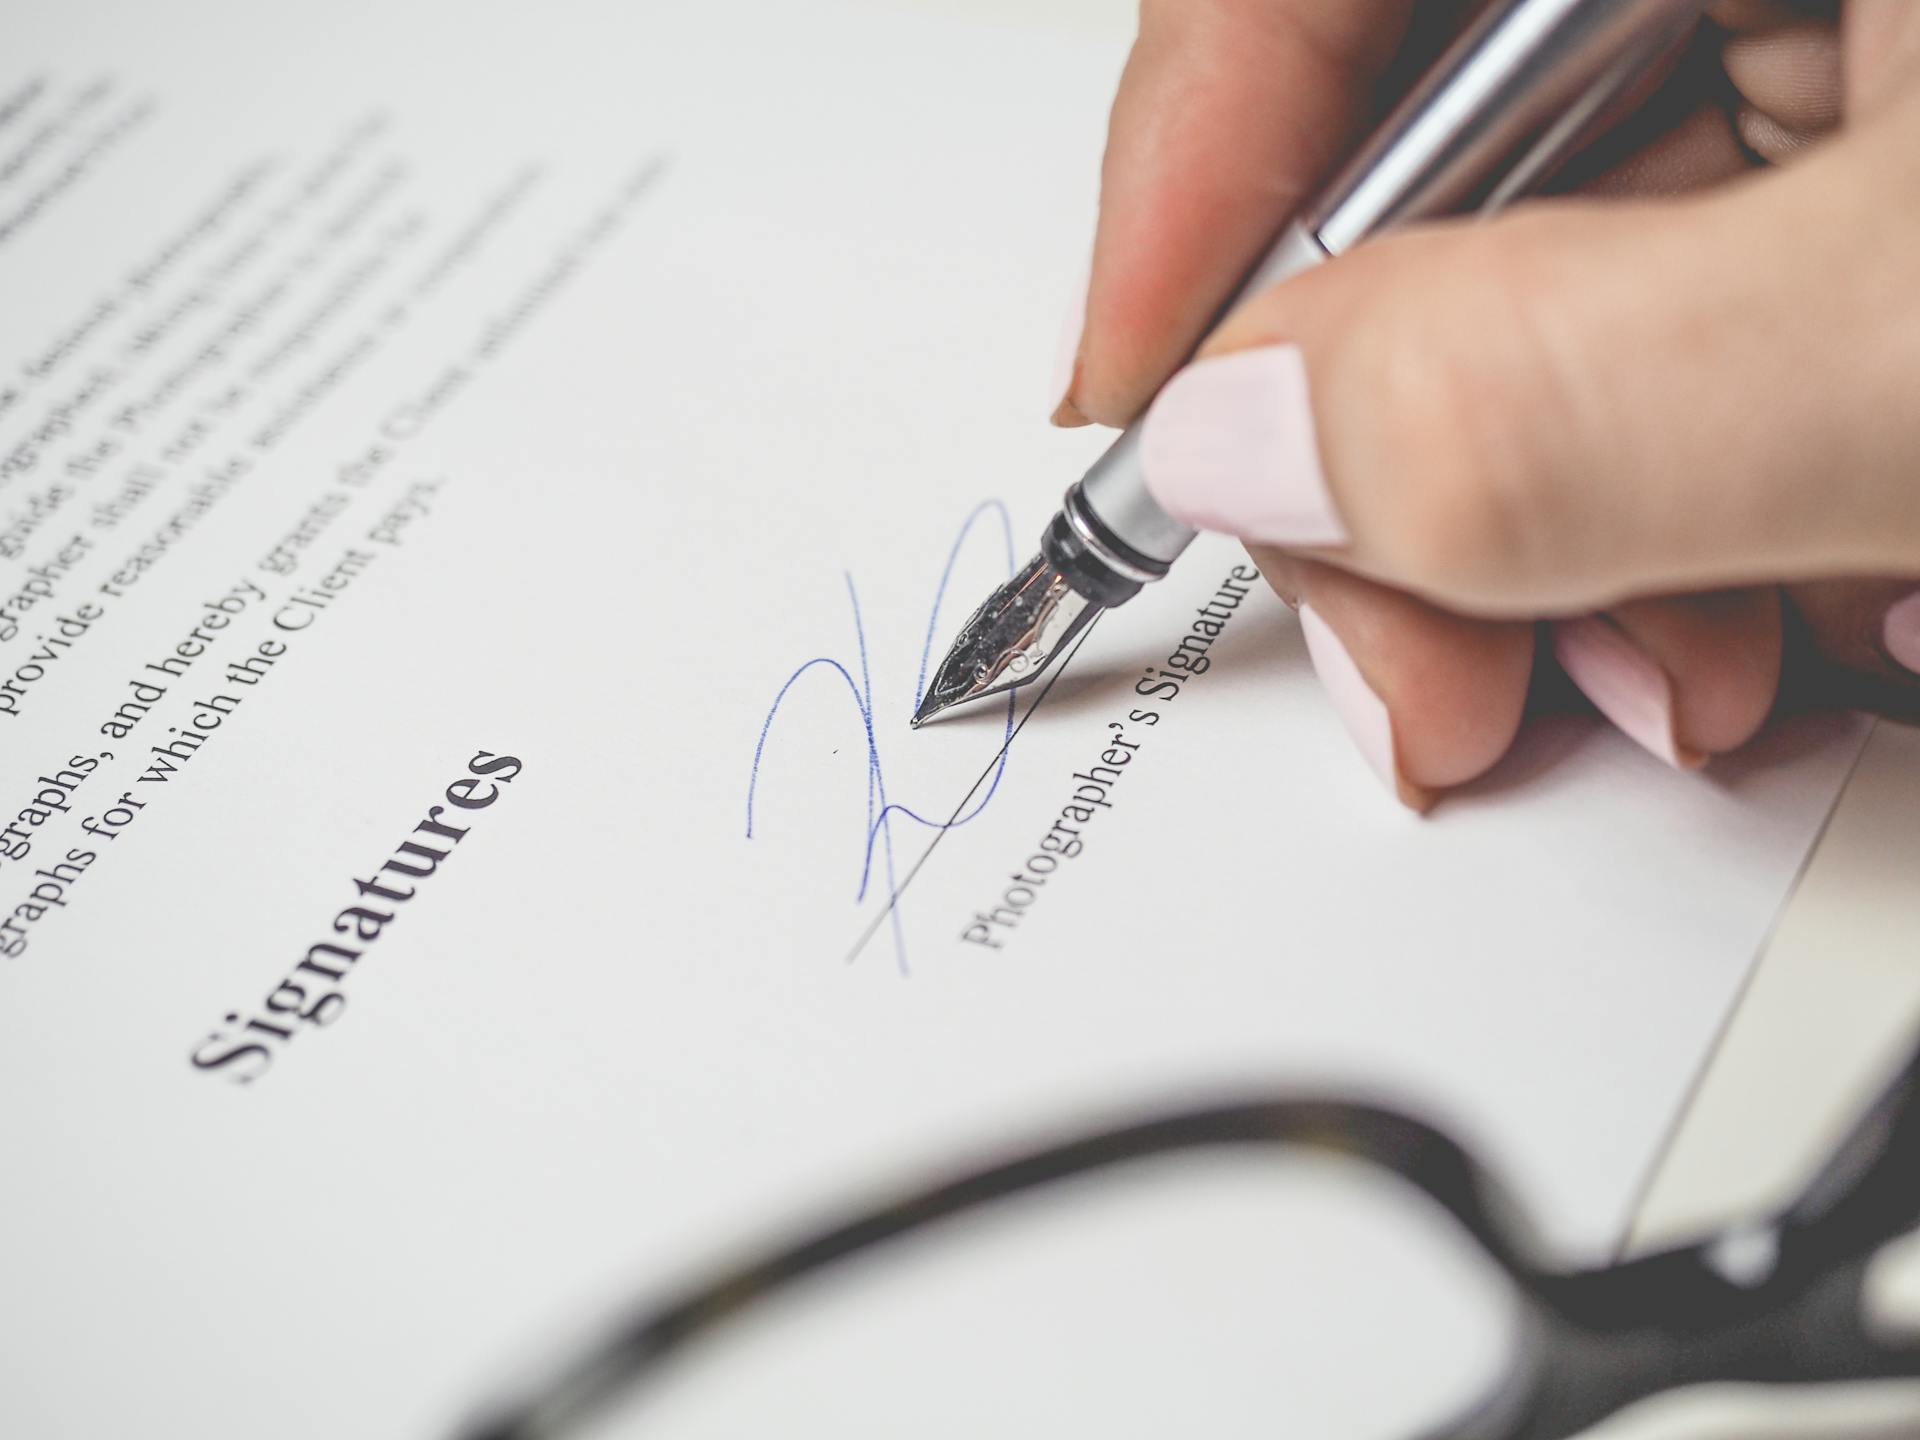 A close-up shot of a woman signing a document | Source: Pexels